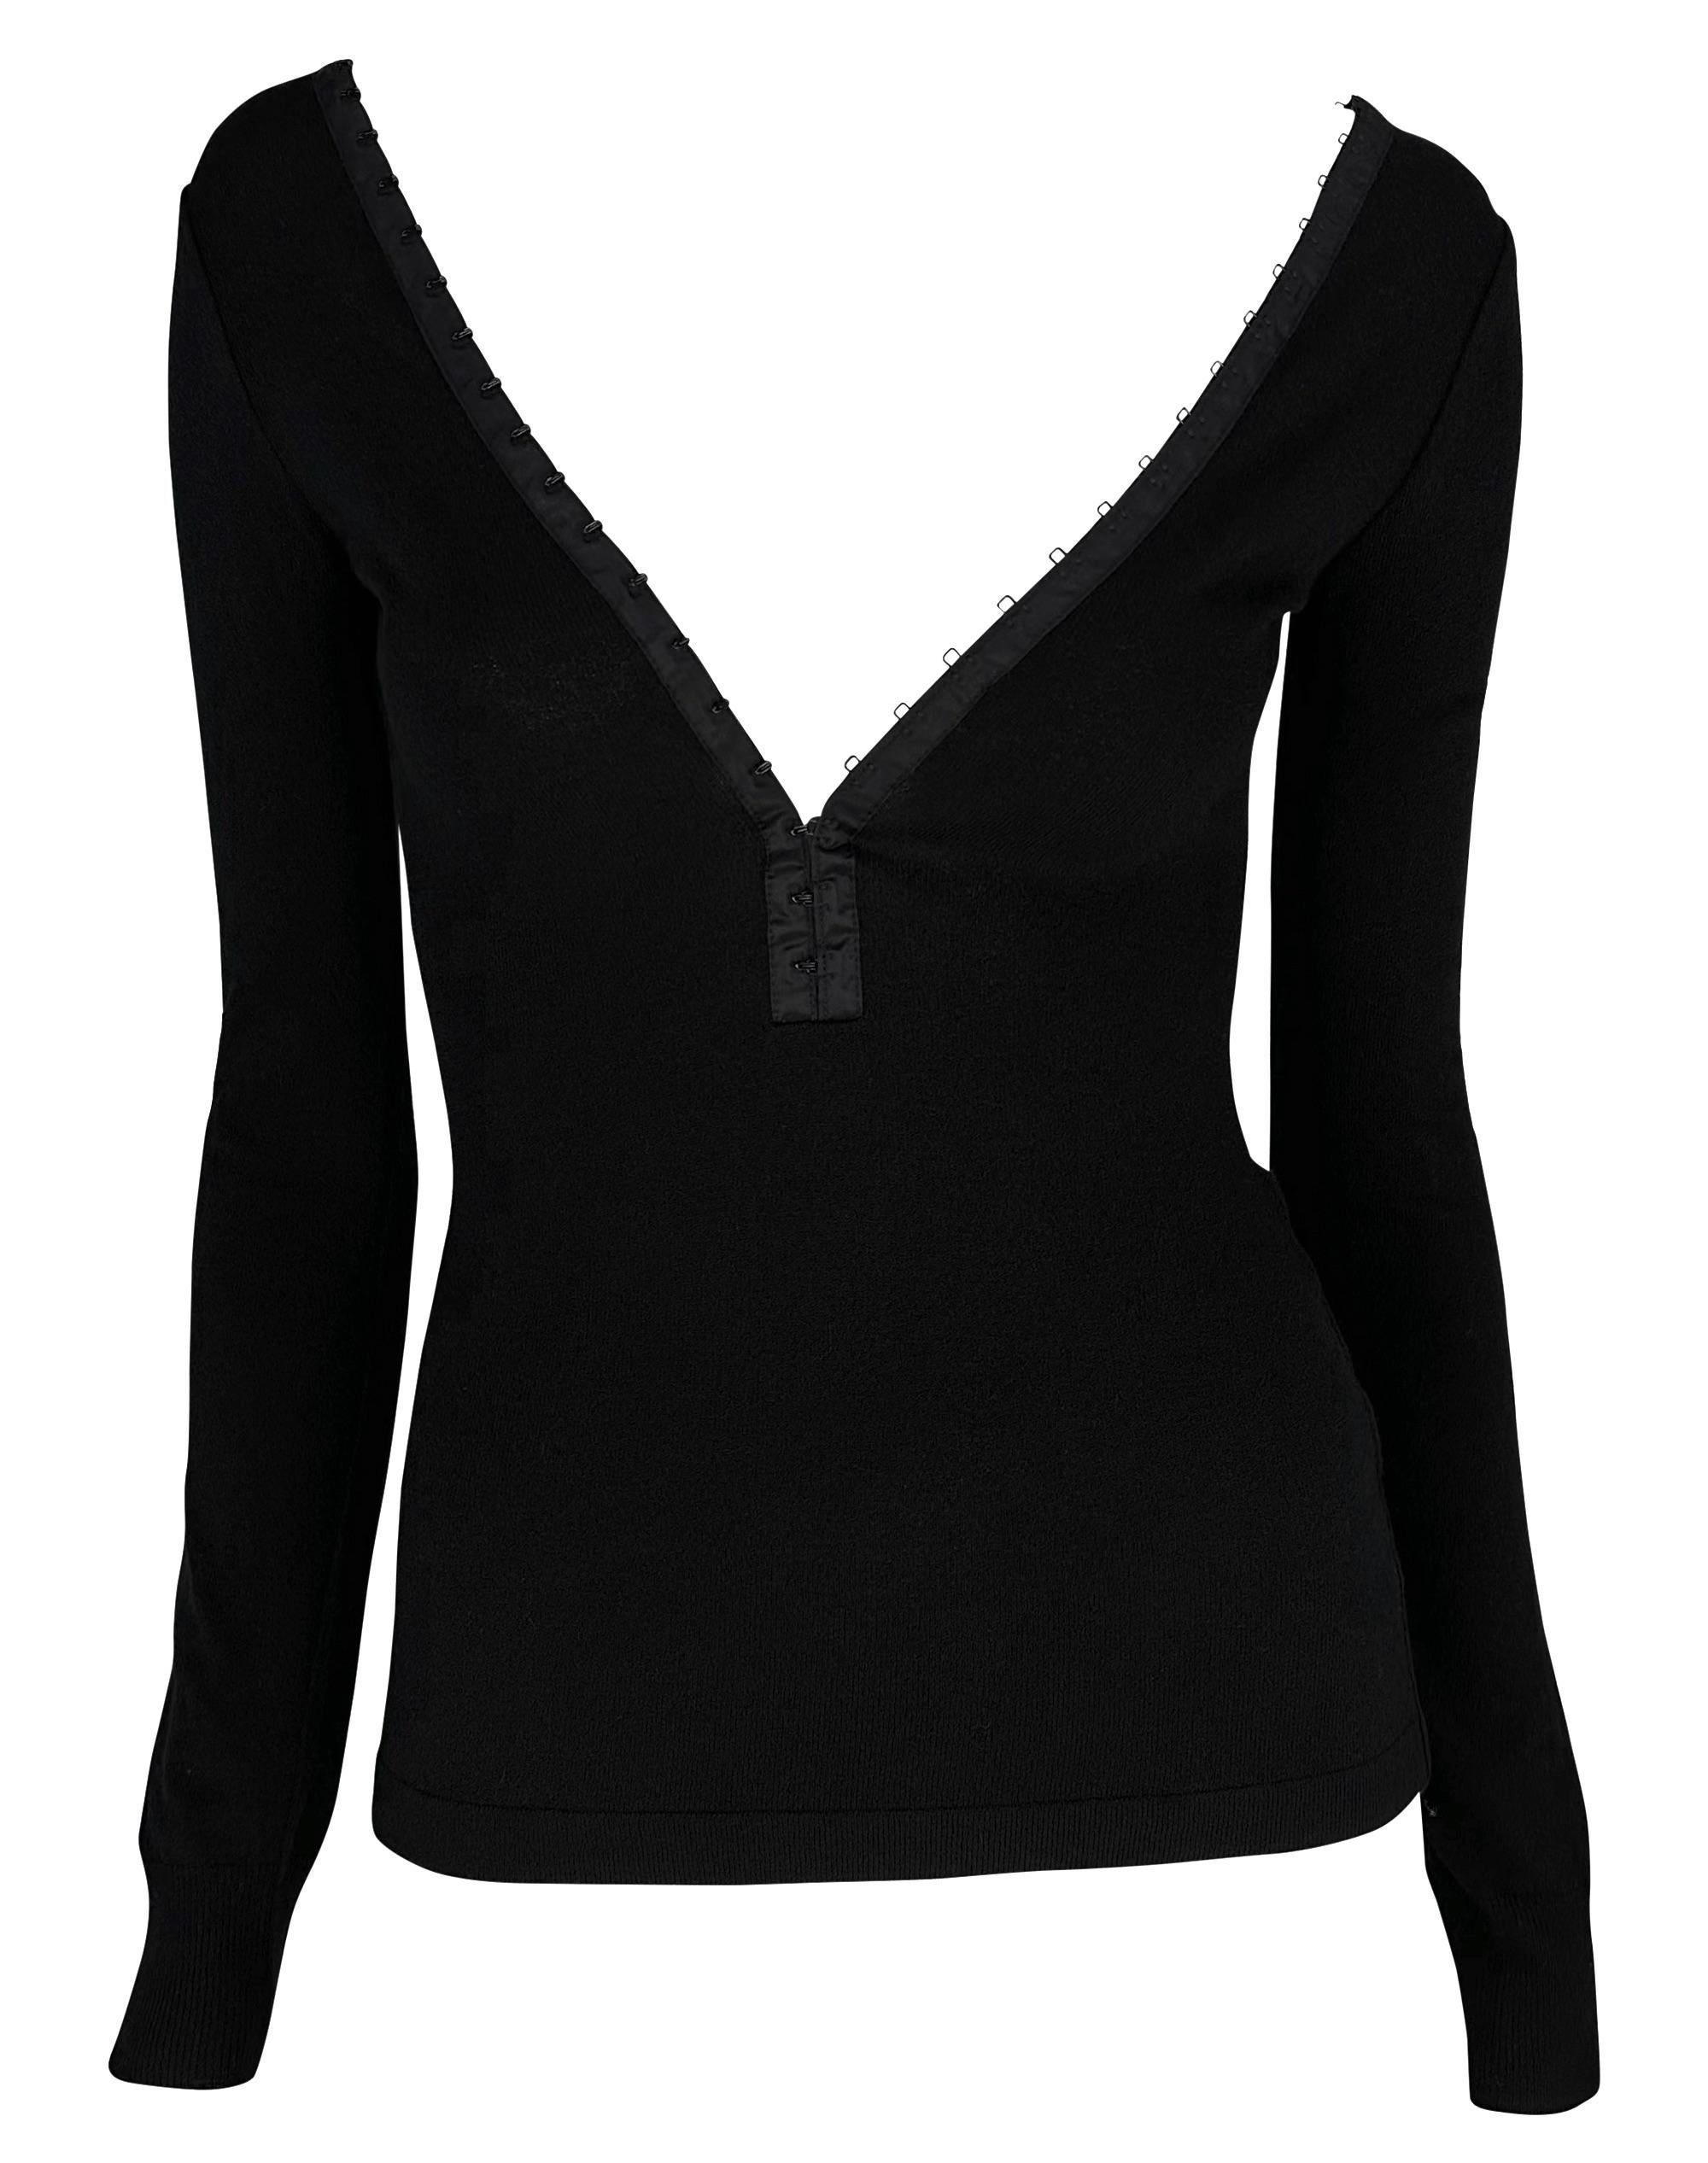 This fabulous black knit long-sleeve top, featuring a plunging neckline, is from the Spring/Summer 2003 Dolce & Gabbana 'Sex and Love' collection. The top features hook and eye closures that line the plunging v-neckline and extend to the back. 